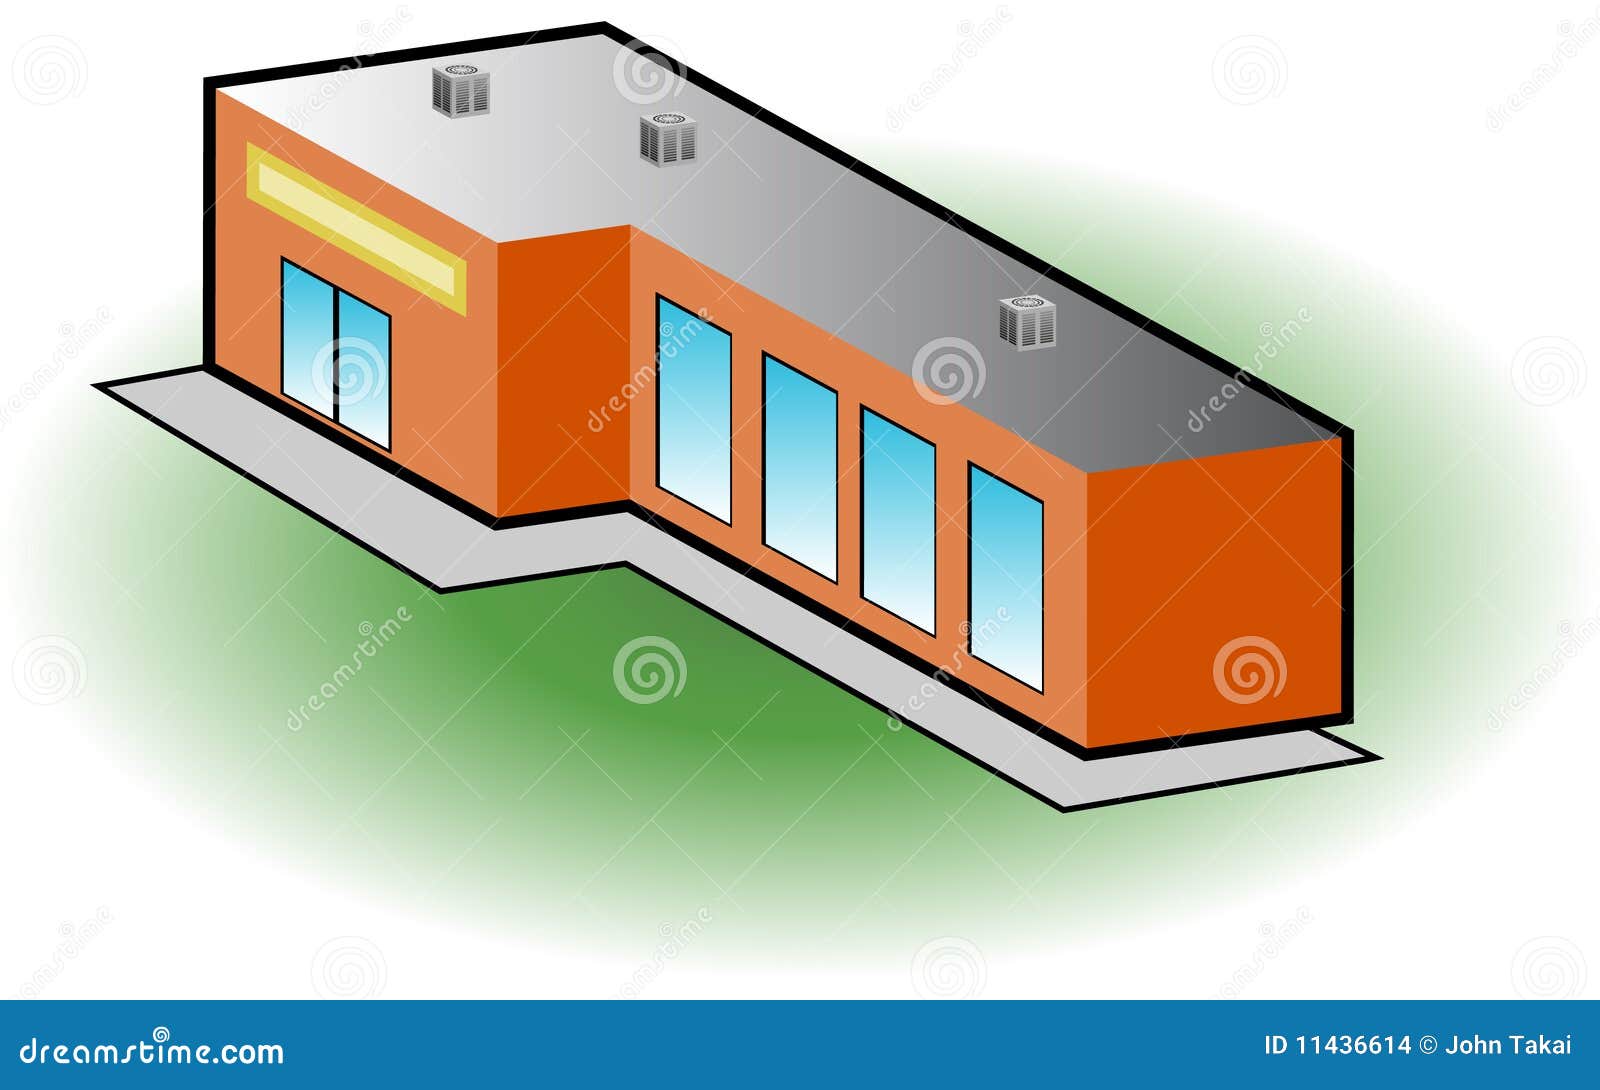 clipart retail store - photo #17